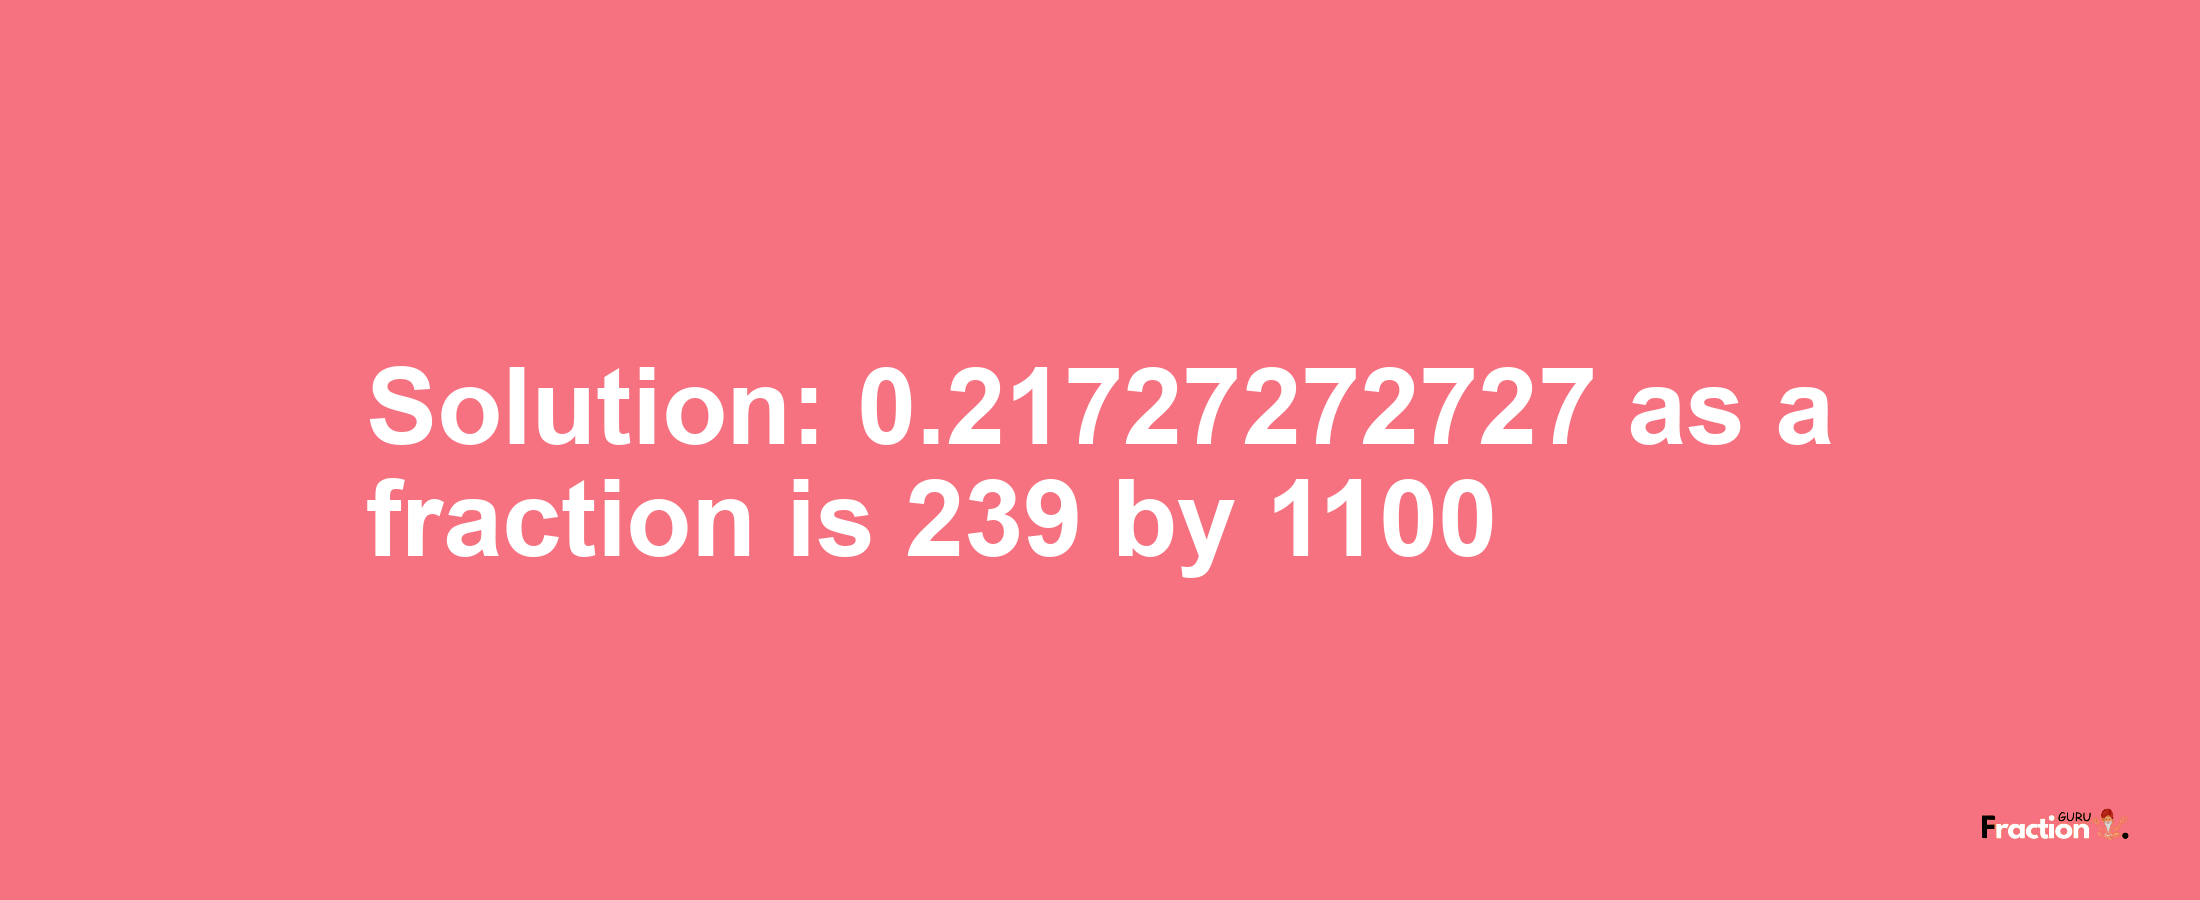 Solution:0.21727272727 as a fraction is 239/1100